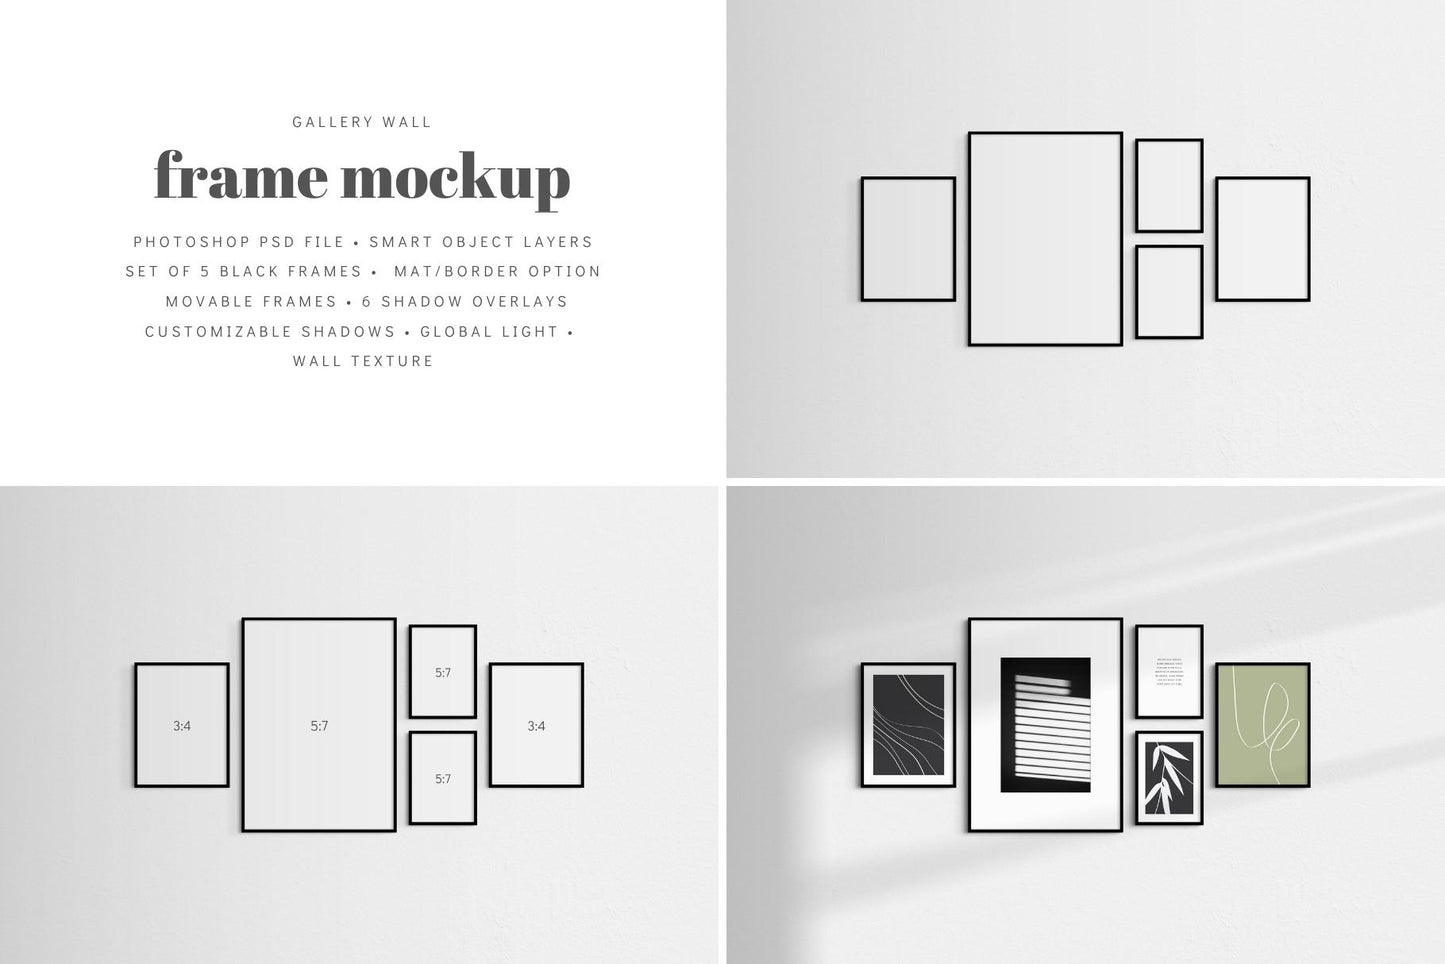 Showcase your artwork in an elegant, modern way with this customizable and easy-to-use minimalist gallery wall frame mockup that features a set of 5 thin black frames.